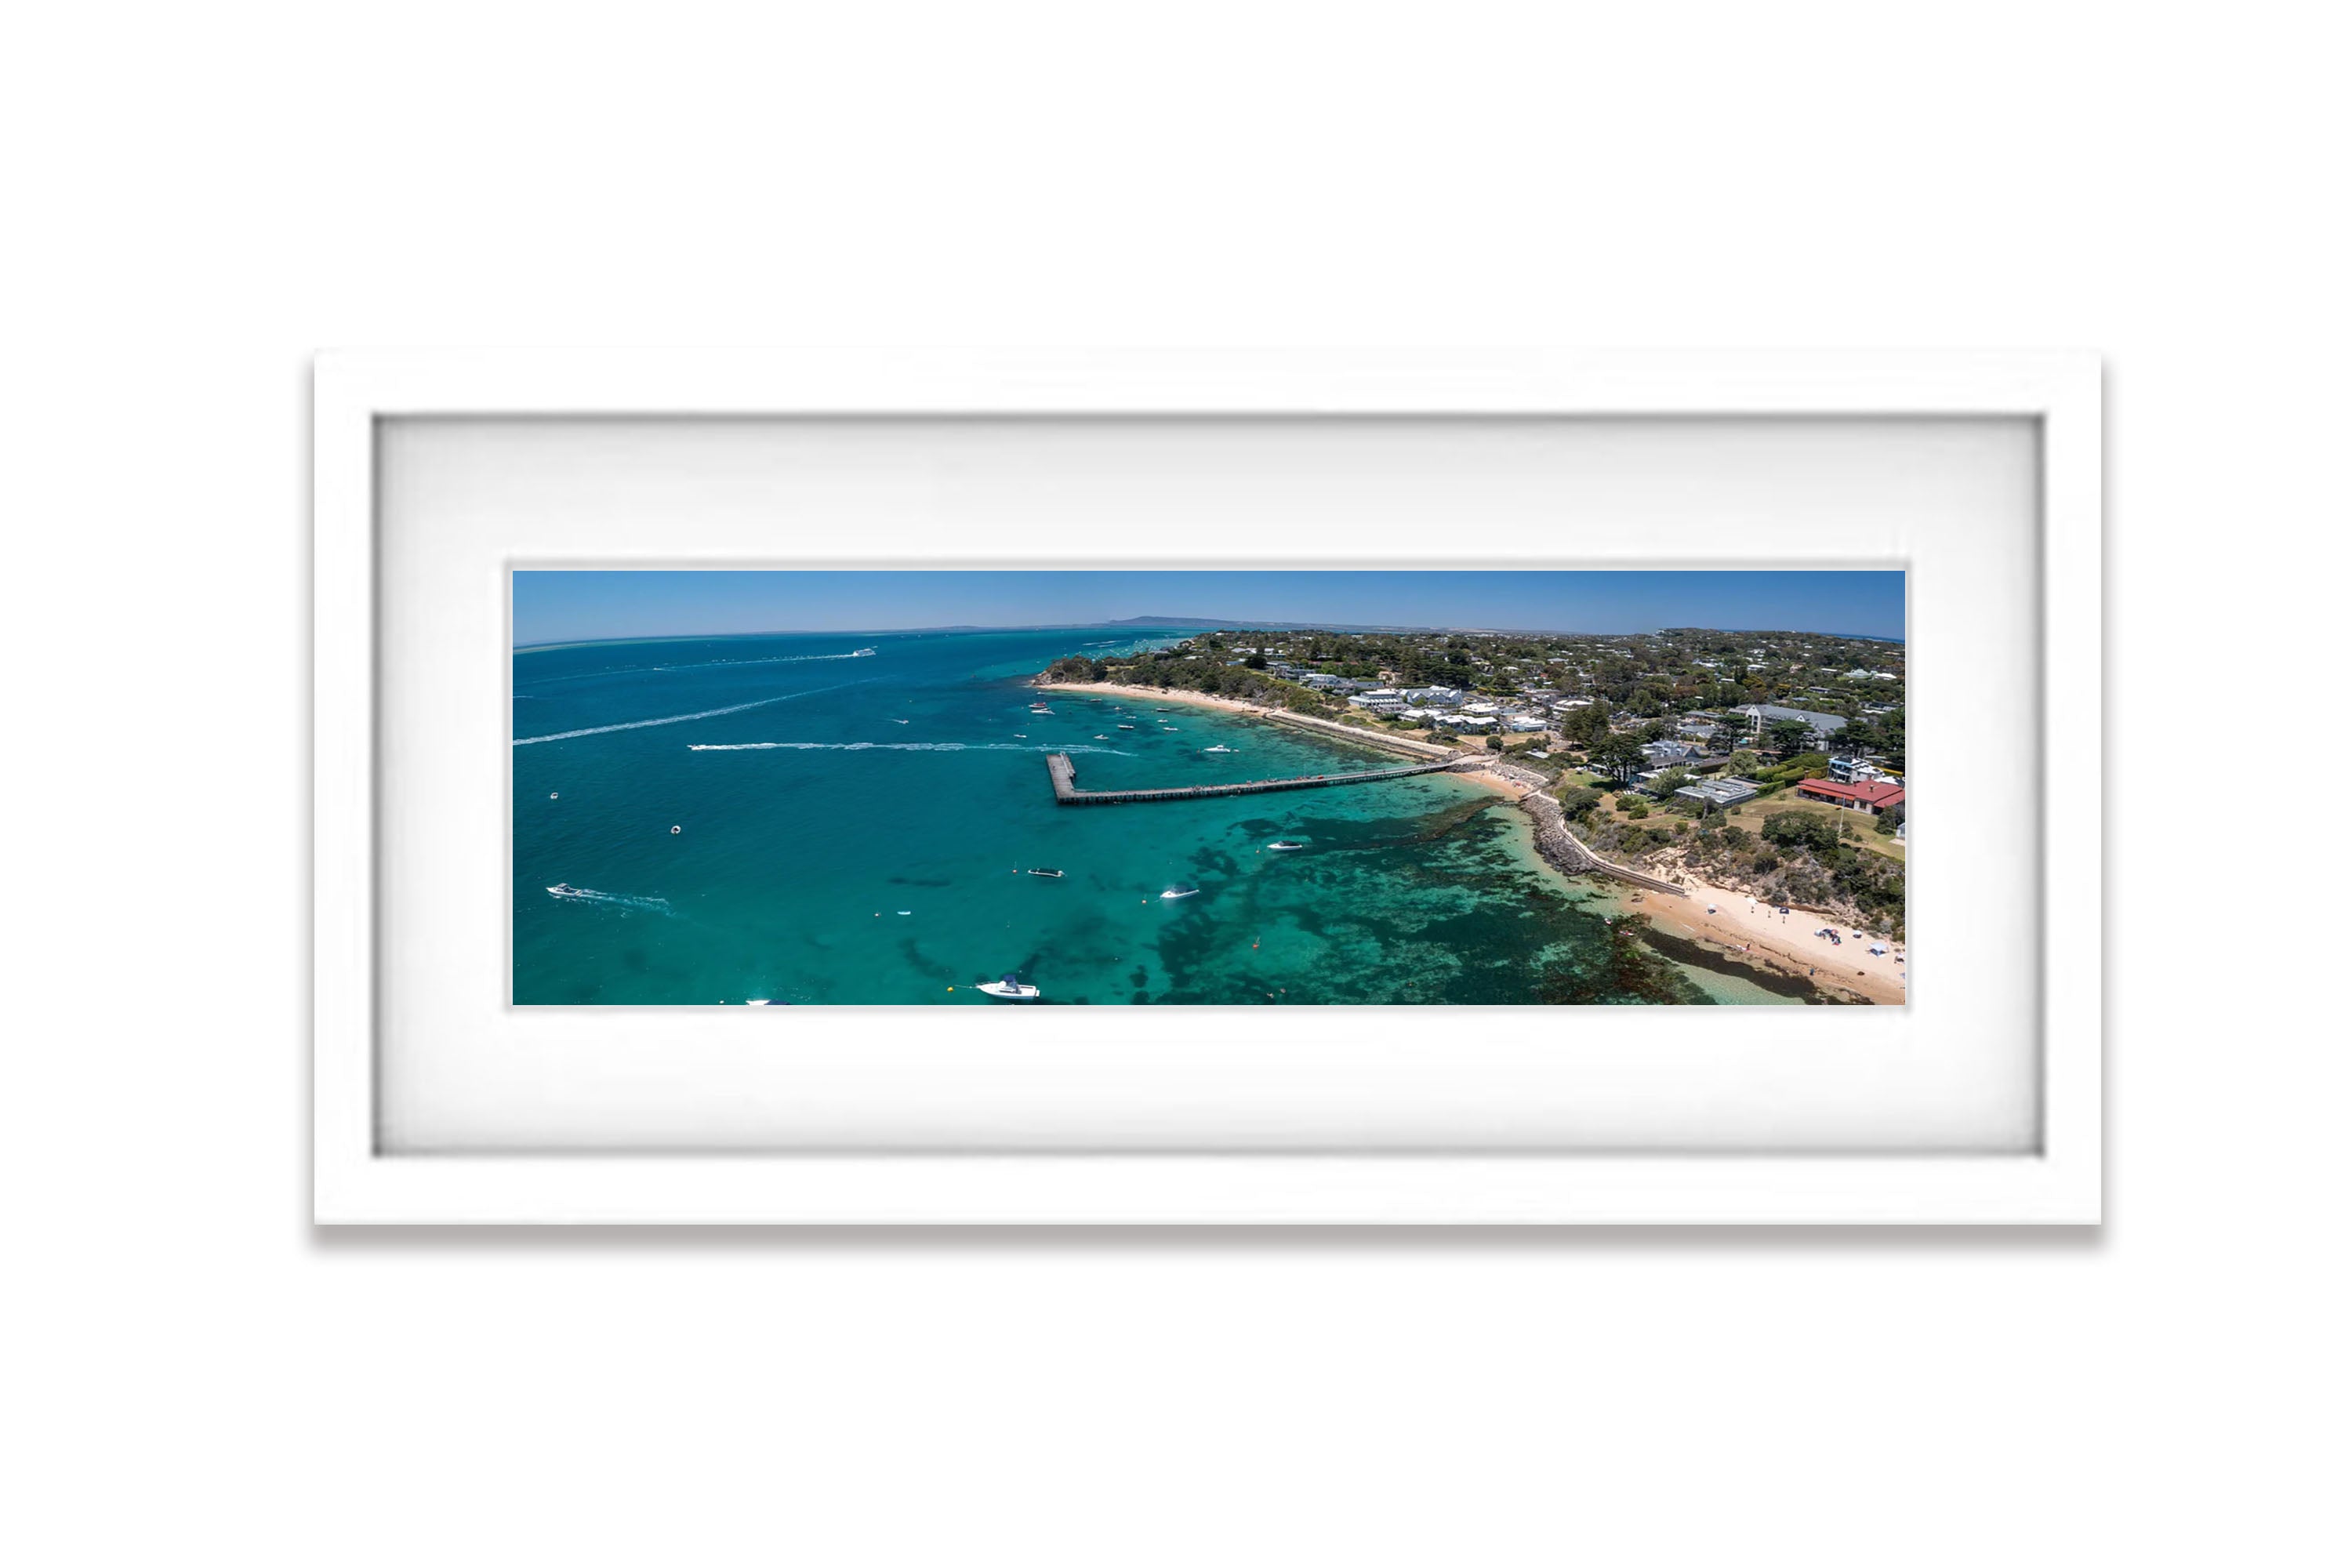 Portsea Pier from above